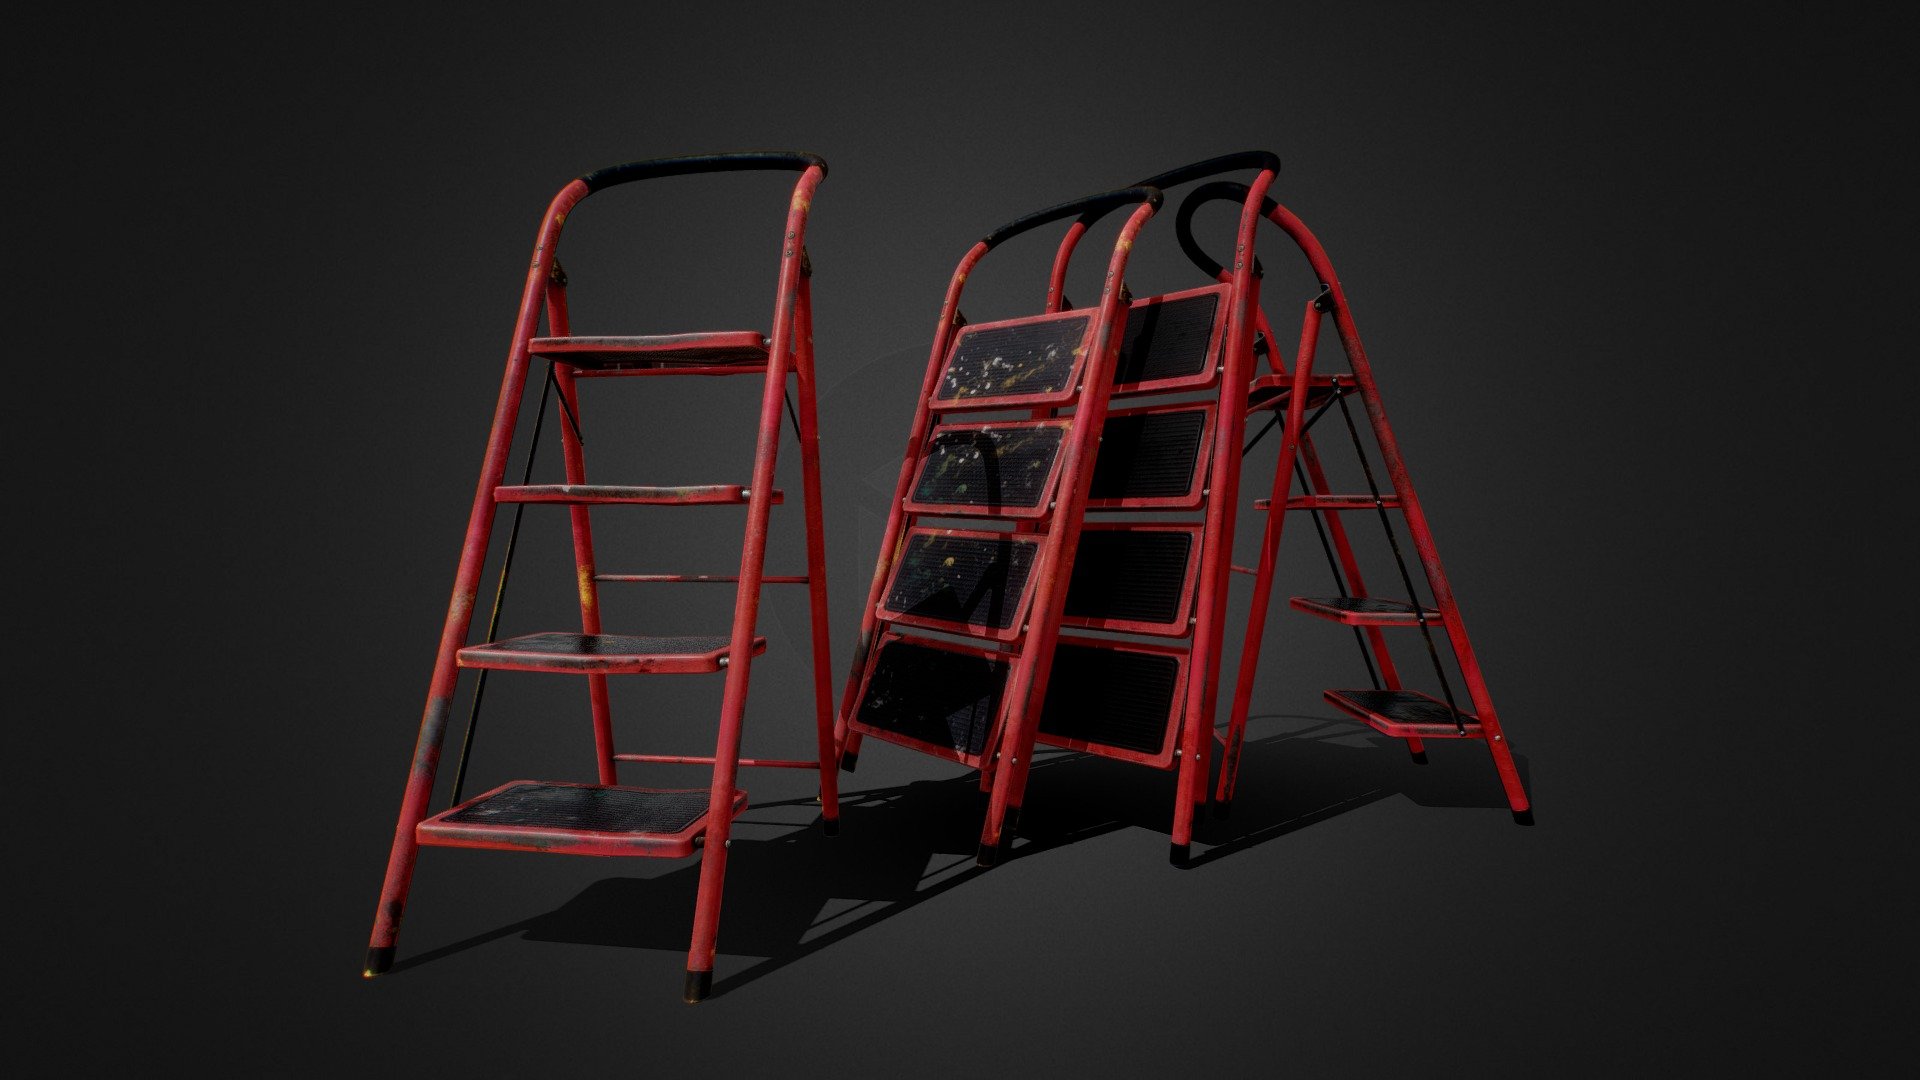 Vertex count of one stepladder - 3 410. Clean topology.

Texture maps in 4096 px - AO, Albedo, Normal, Metallic and Roughness. Ambient occlusion map is universal for all models.

Non-overlapped UV - Ladders - Buy Royalty Free 3D model by Dmitriy Mitroshin (@LtxxwSibeRia) 3d model